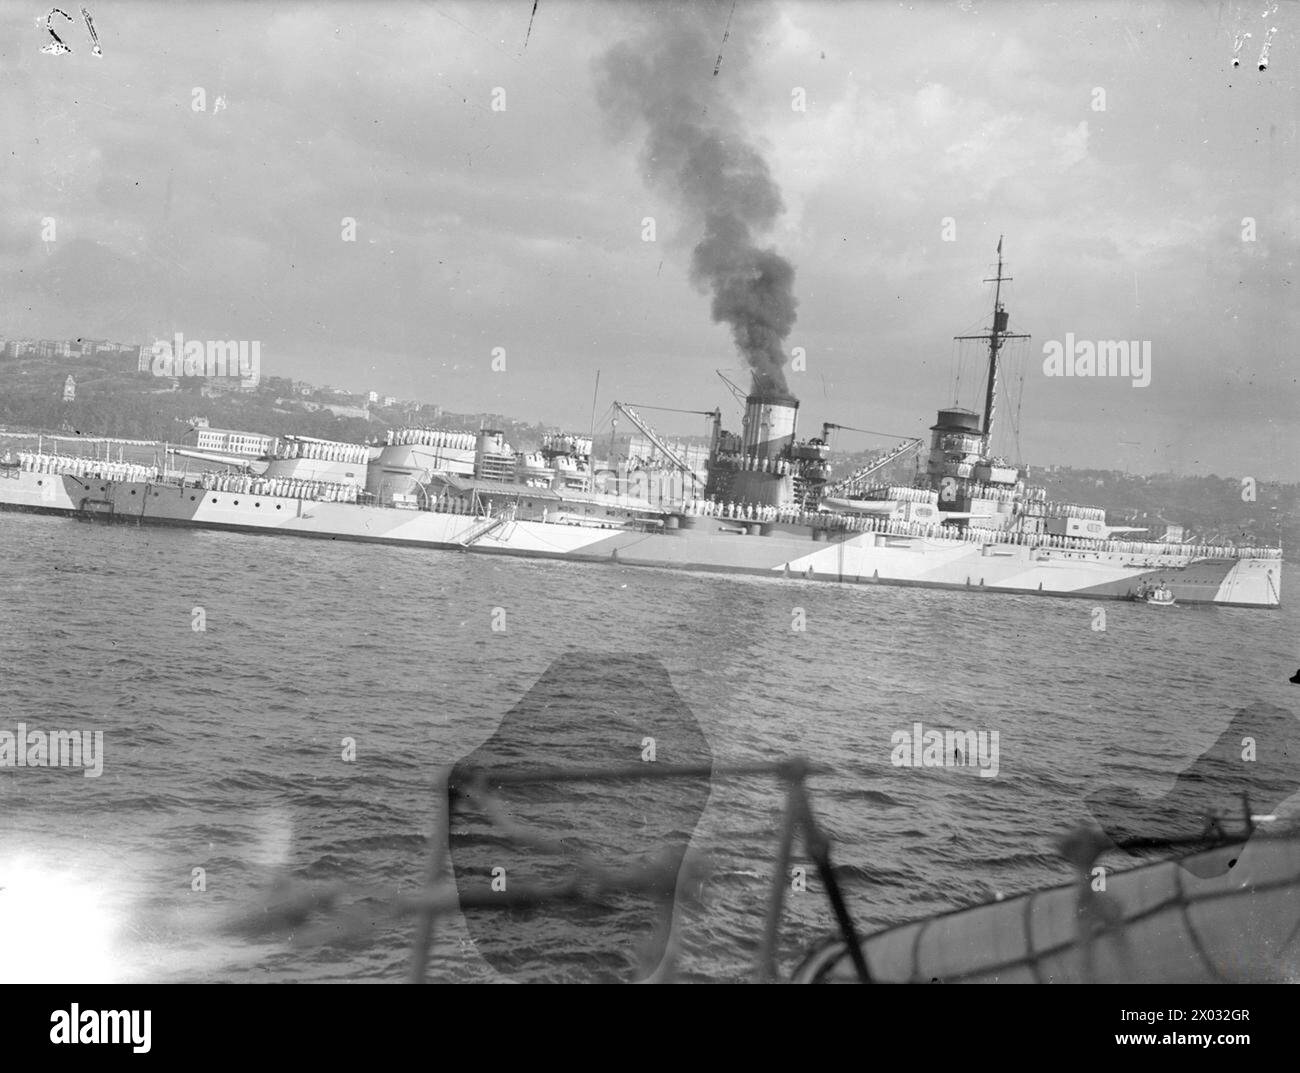 THE BRITISH CRUISER HMS AJAX VISITS TURKEY. 15 TO 18 SEPTEMBER 1945, ON BOARD HMS AJAX, AND ASHORE AT ISTANBUL. DURING THE VISIT OF HMS AJAX AND THE DESTROYERS HMS MARNE AND HMS METEOR TO ISTANBUL. ON BOARD THE CRUISER WAS HRH EMIR ABDUL ILLAH, REGENT OF IRAQ, AND HIS STAFF. ON 16 SEPTEMBER 1945 CAPTAIN J CUTHBERT, RN, OF THE AJAX LAID A WREATH ON THE TURKISH INDEPENDENCE MEMORIAL IN TAKSIM SQUARE, ISTANBUL, AND THE NEXT DAY THE CRUISER WAS OPEN TO VISITORS. - Turkish flagship YAVUZ with side manned as Ajax passes  Yavuz Stock Photo